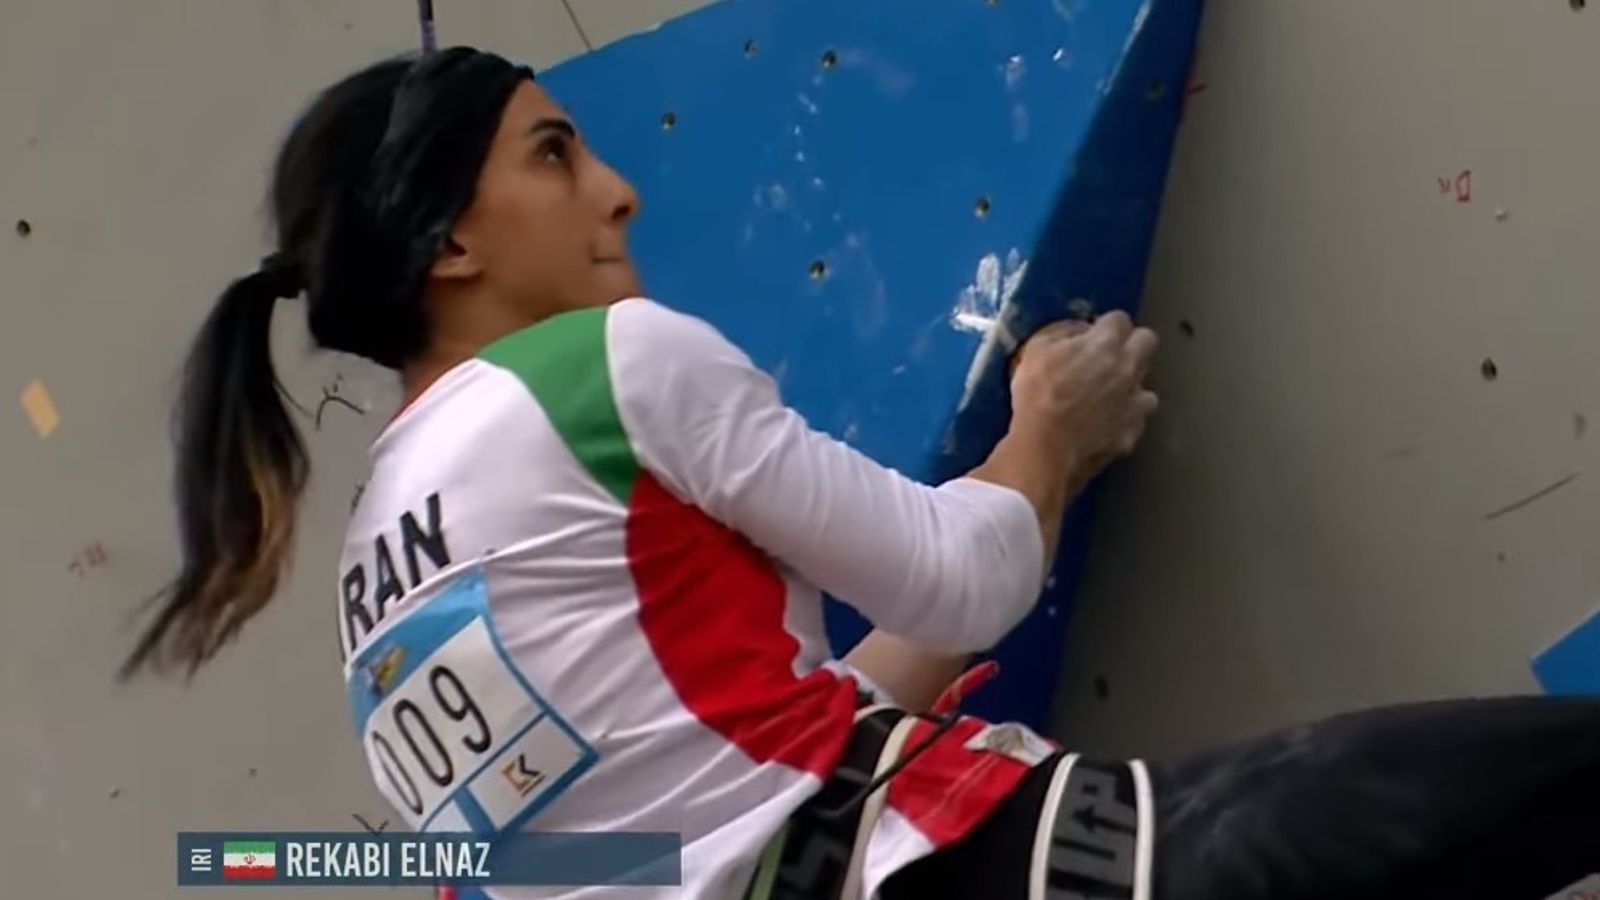 Iranian climber Elnaz Rekabi who competed without hijab says it was 'completely unintentional'